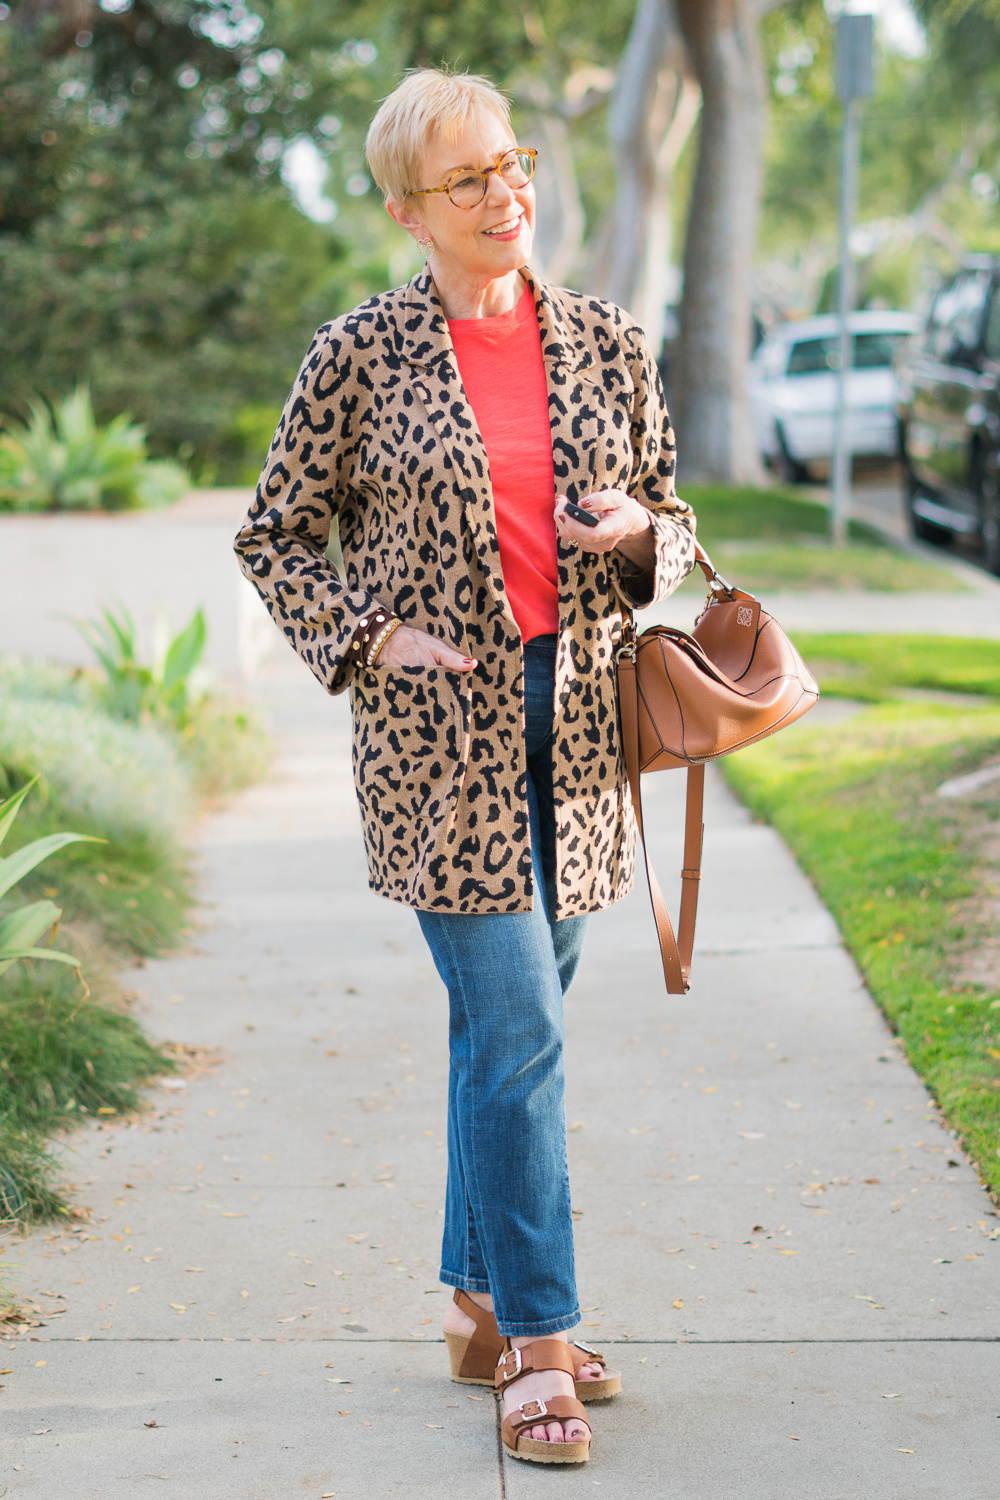 Susan B. of une femme d'un certain age wears a leopard sweater jacket with a coral tee, jeans, and Loewe puzzle bag.